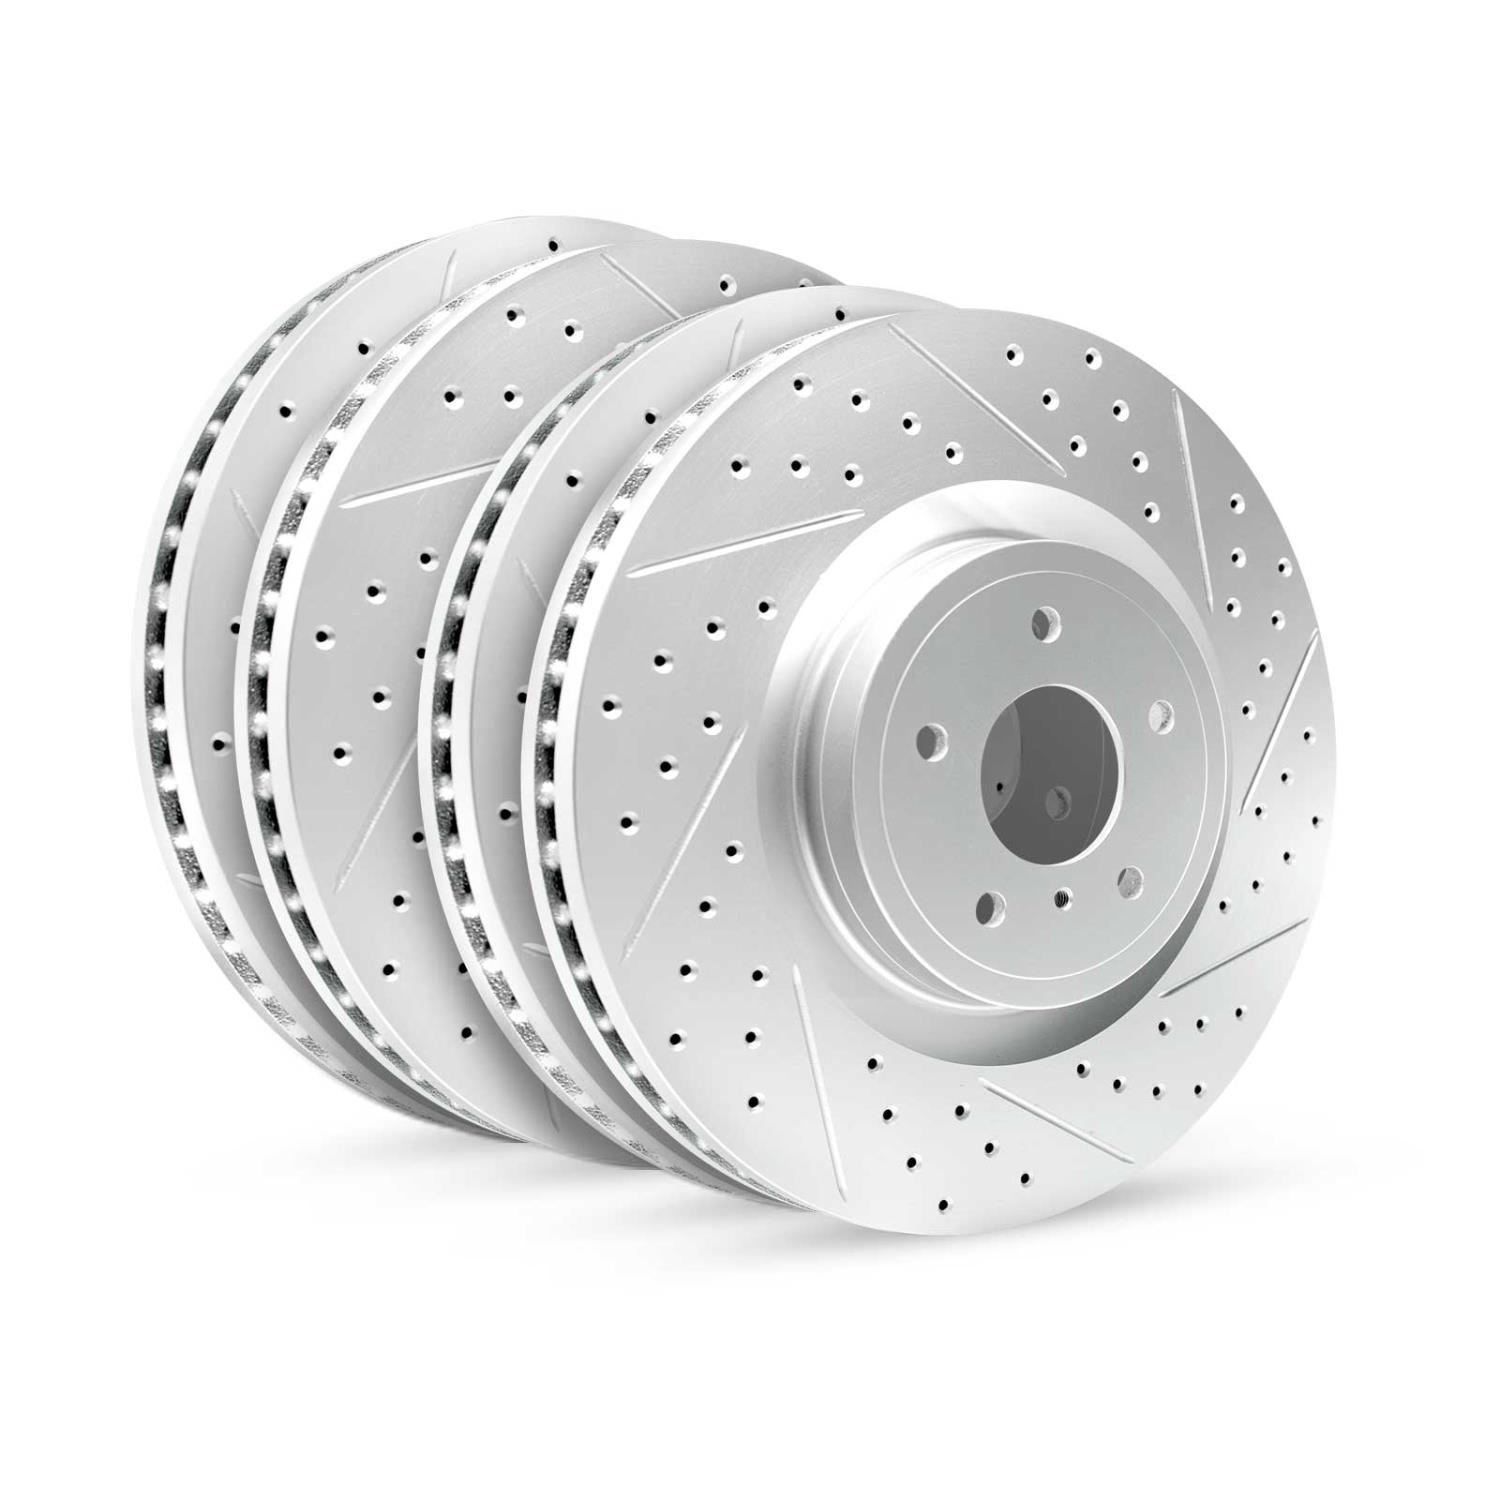 GEO-Carbon Drilled/Slotted Rotors, 2001-2008 Acura/Honda, Position: Front/Rear